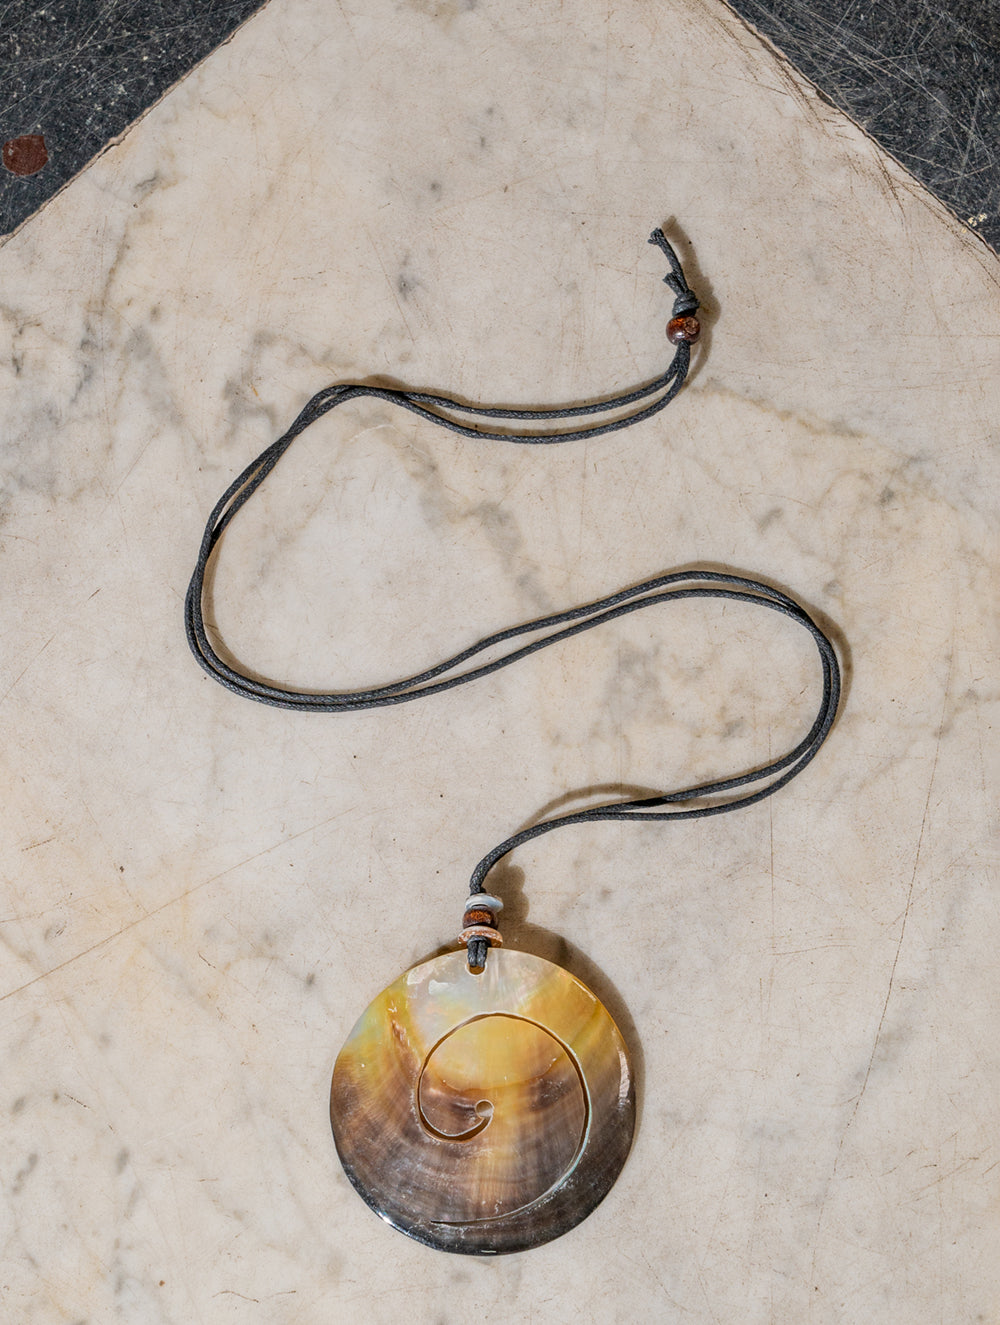 Load image into Gallery viewer, Oceanic Coil Necklace